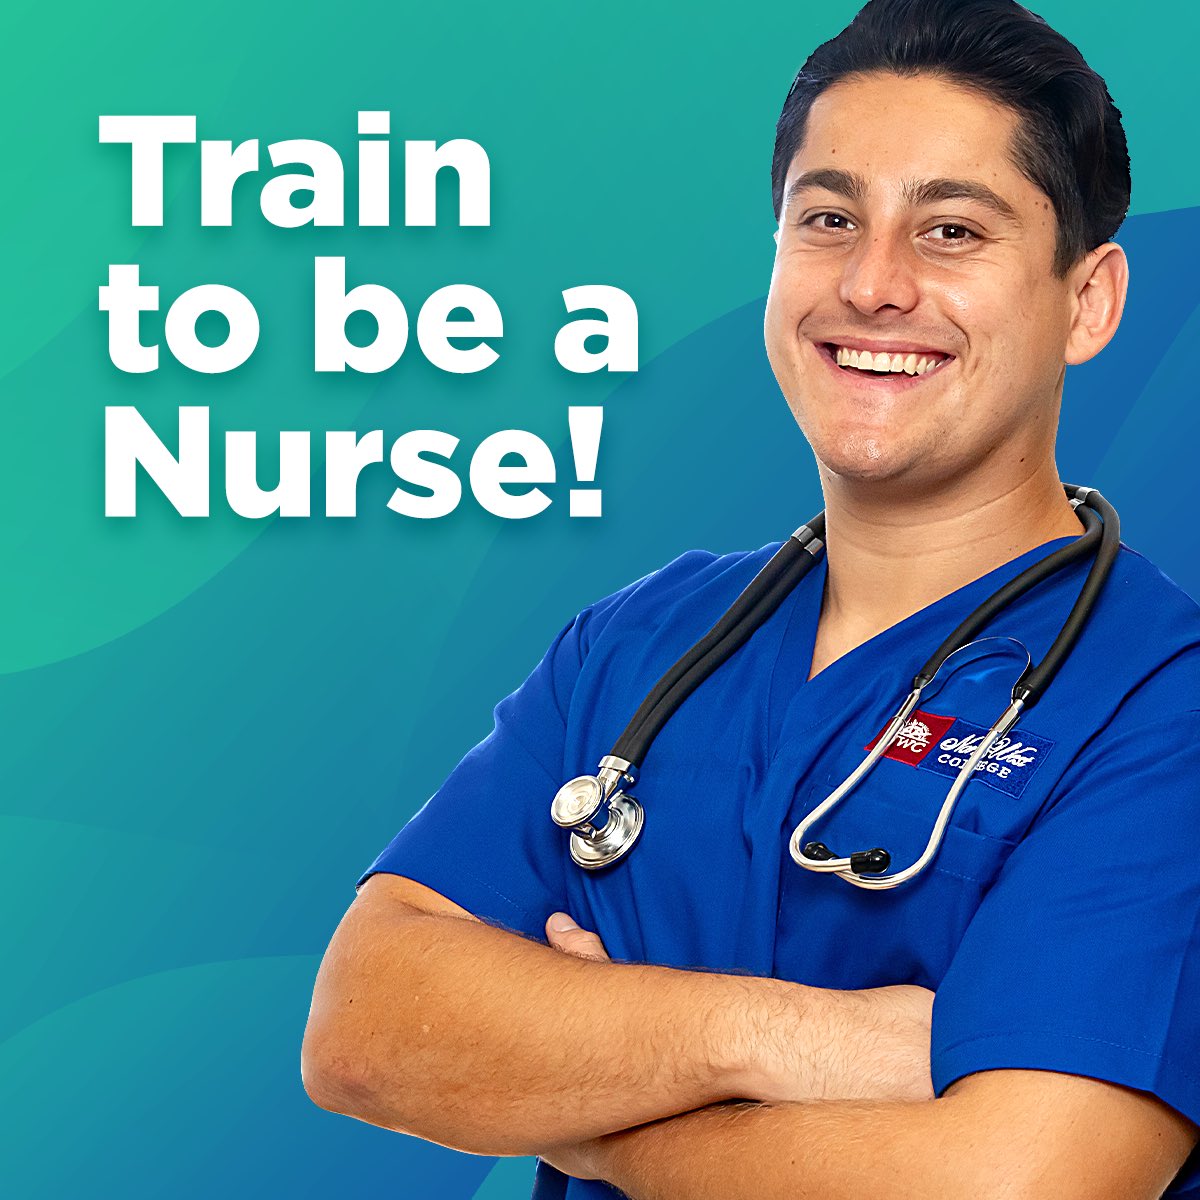 Get the training you need to become a Vocational Nurse. With a few hours a day and a few days a week, now is the perfect time to start training for a new career. Enter at power106.com/edu for a chance to win a $10K scholarship to attend North-West College!! @north_west